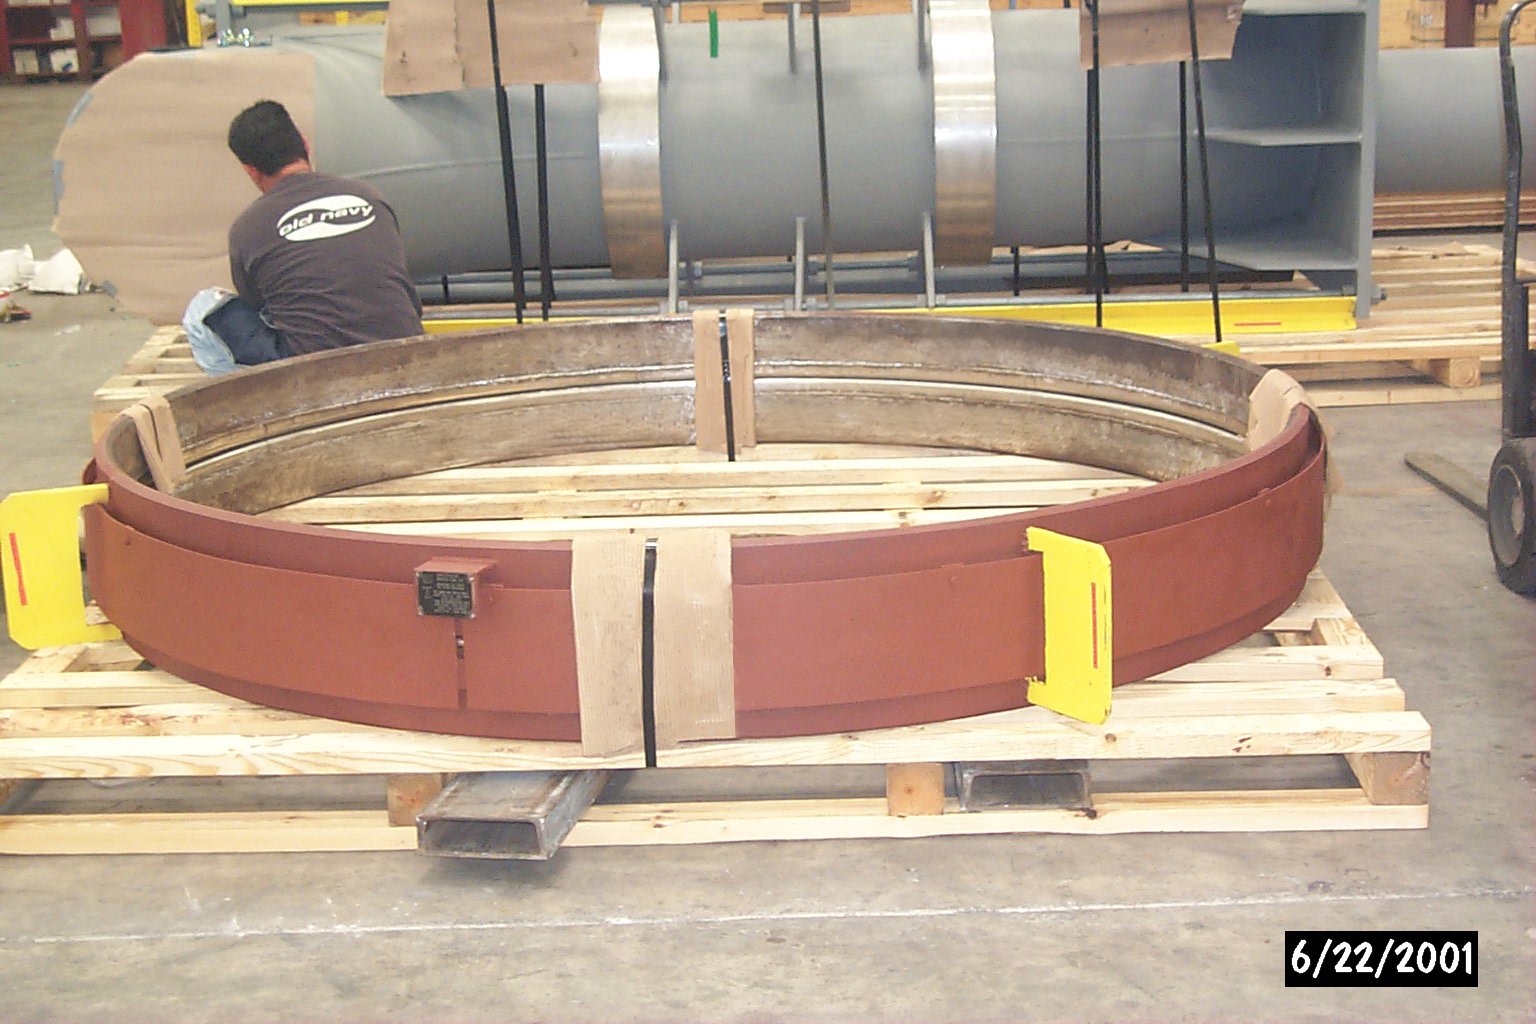 92" I.D. Toroidal Bellow Expansion Joint for an ASME "U" Stamp Heat Exchanger Shell